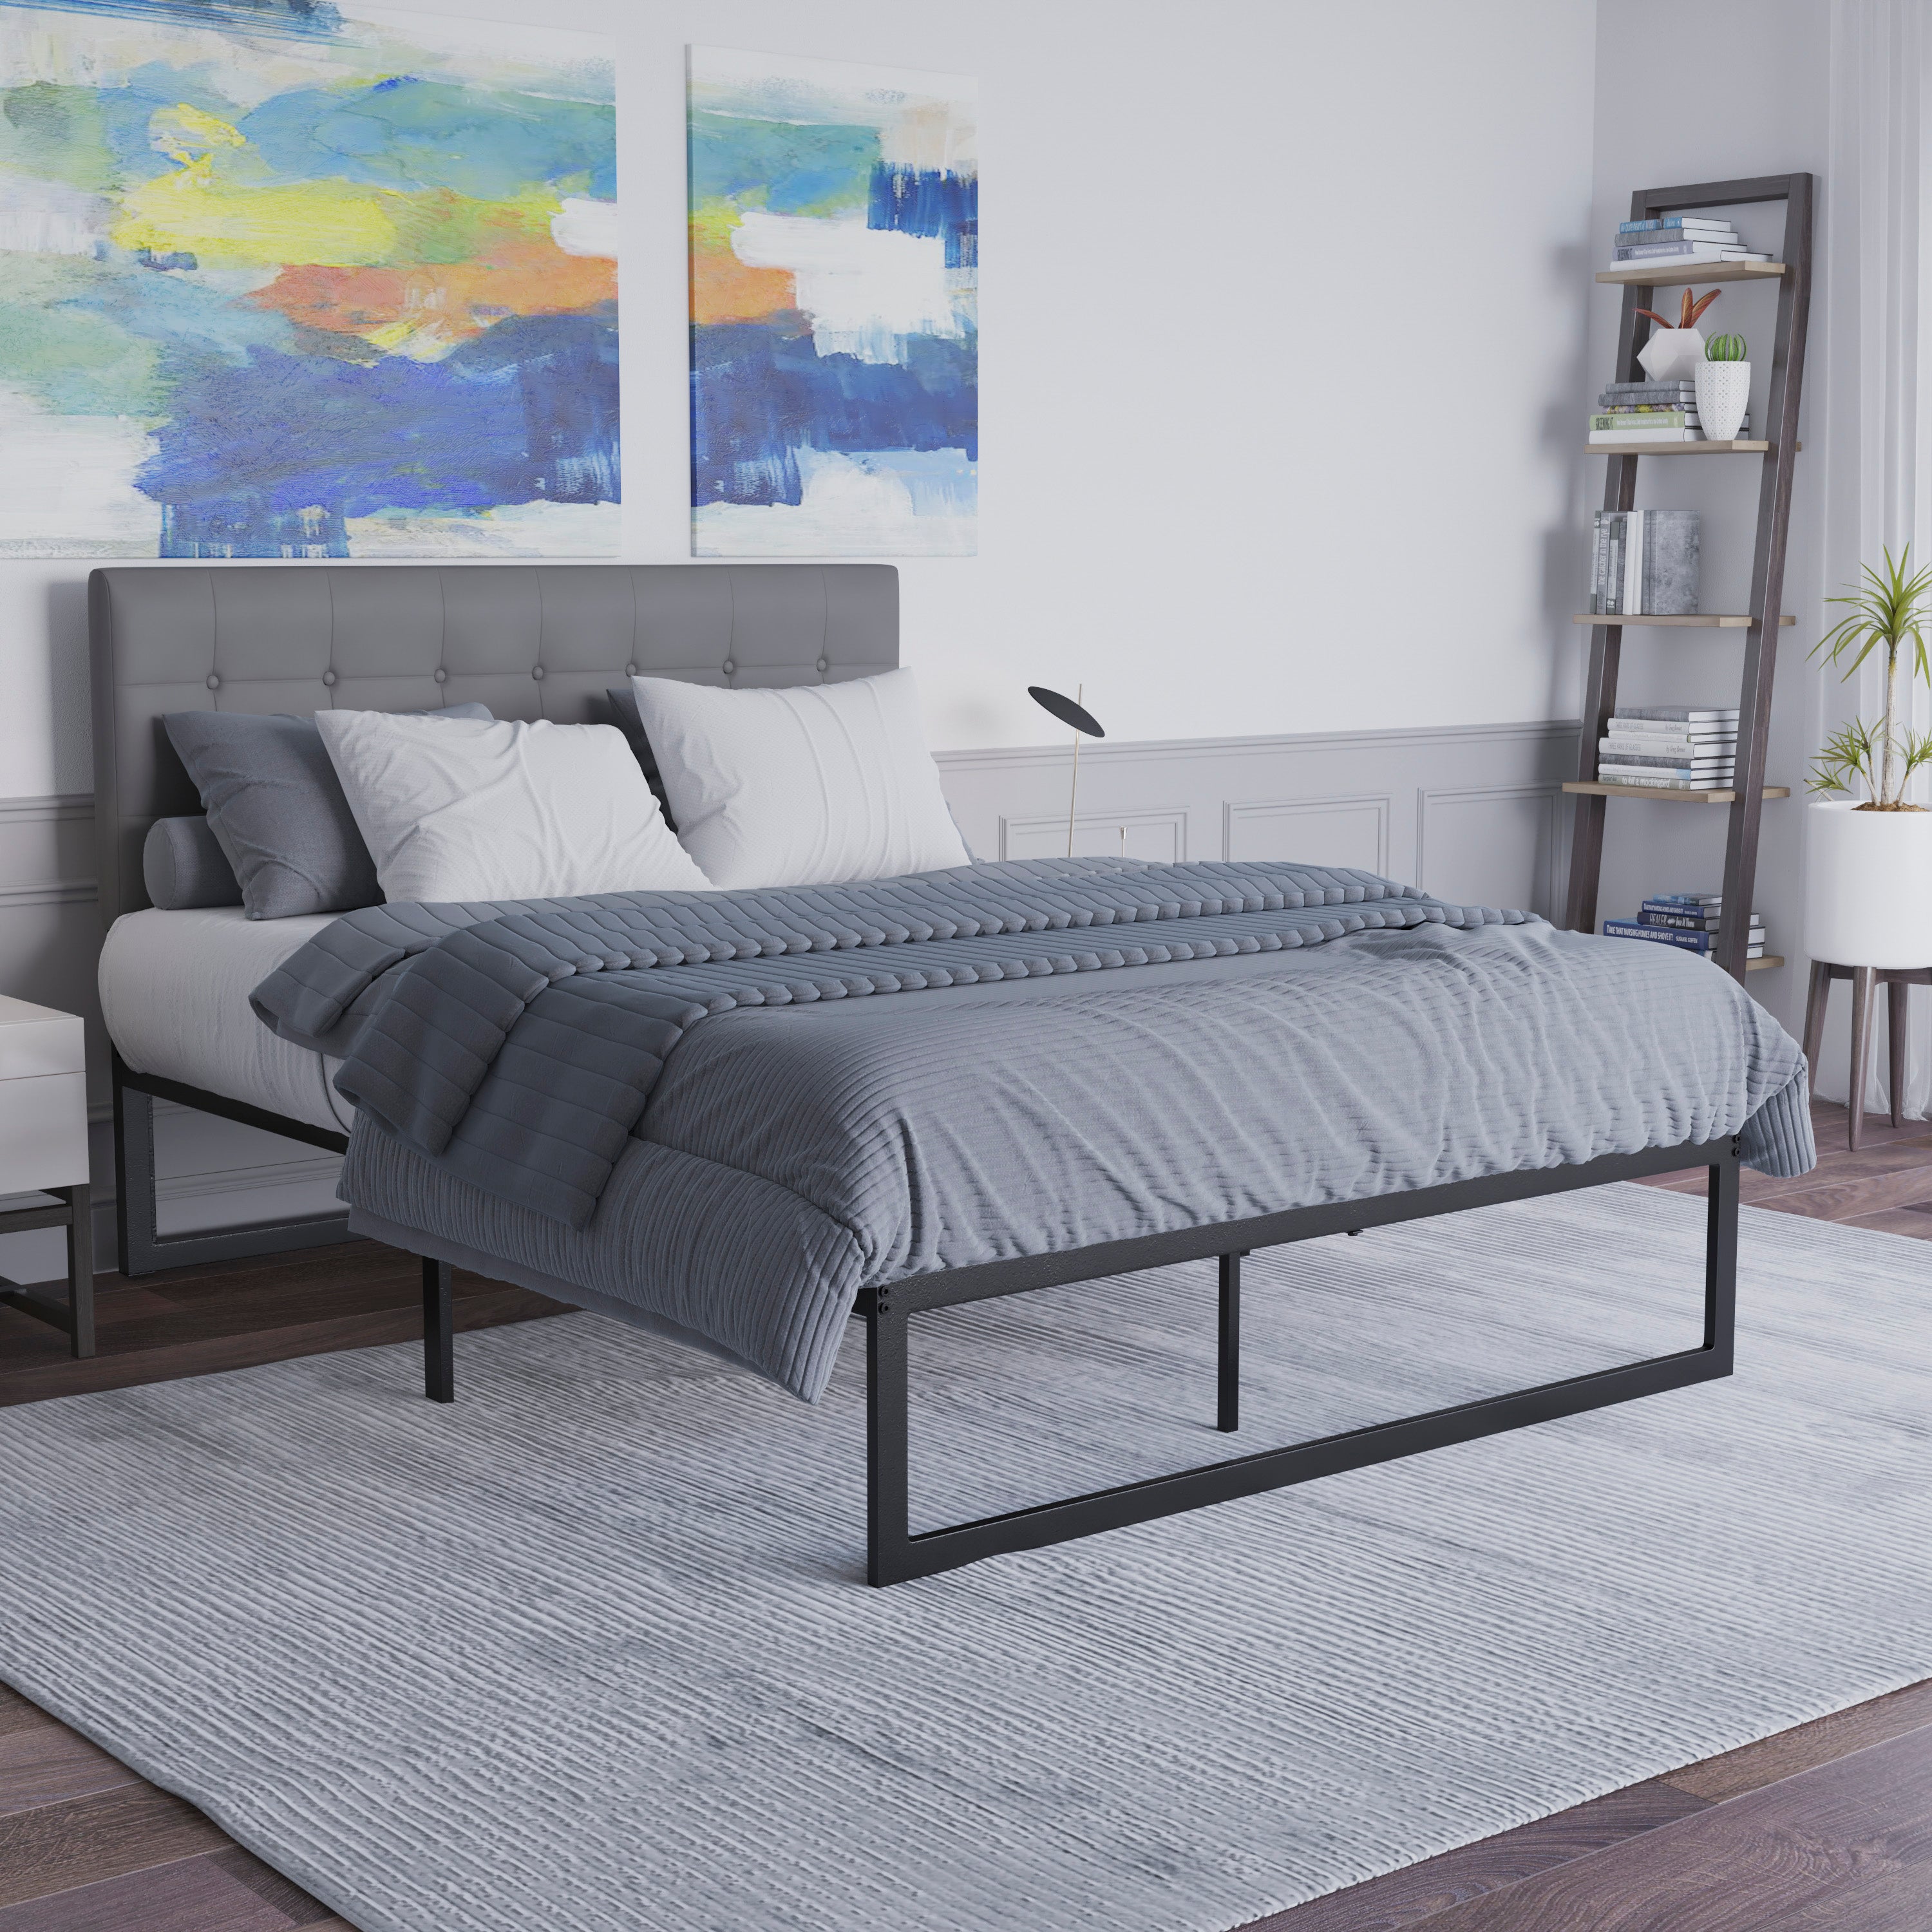 Universal 14 Inch Metal Platform Bed Frame - No Box Spring Needed w/ Steel Slat Support and Quick Lock Functionality-Bed Frame-Flash Furniture-Wall2Wall Furnishings